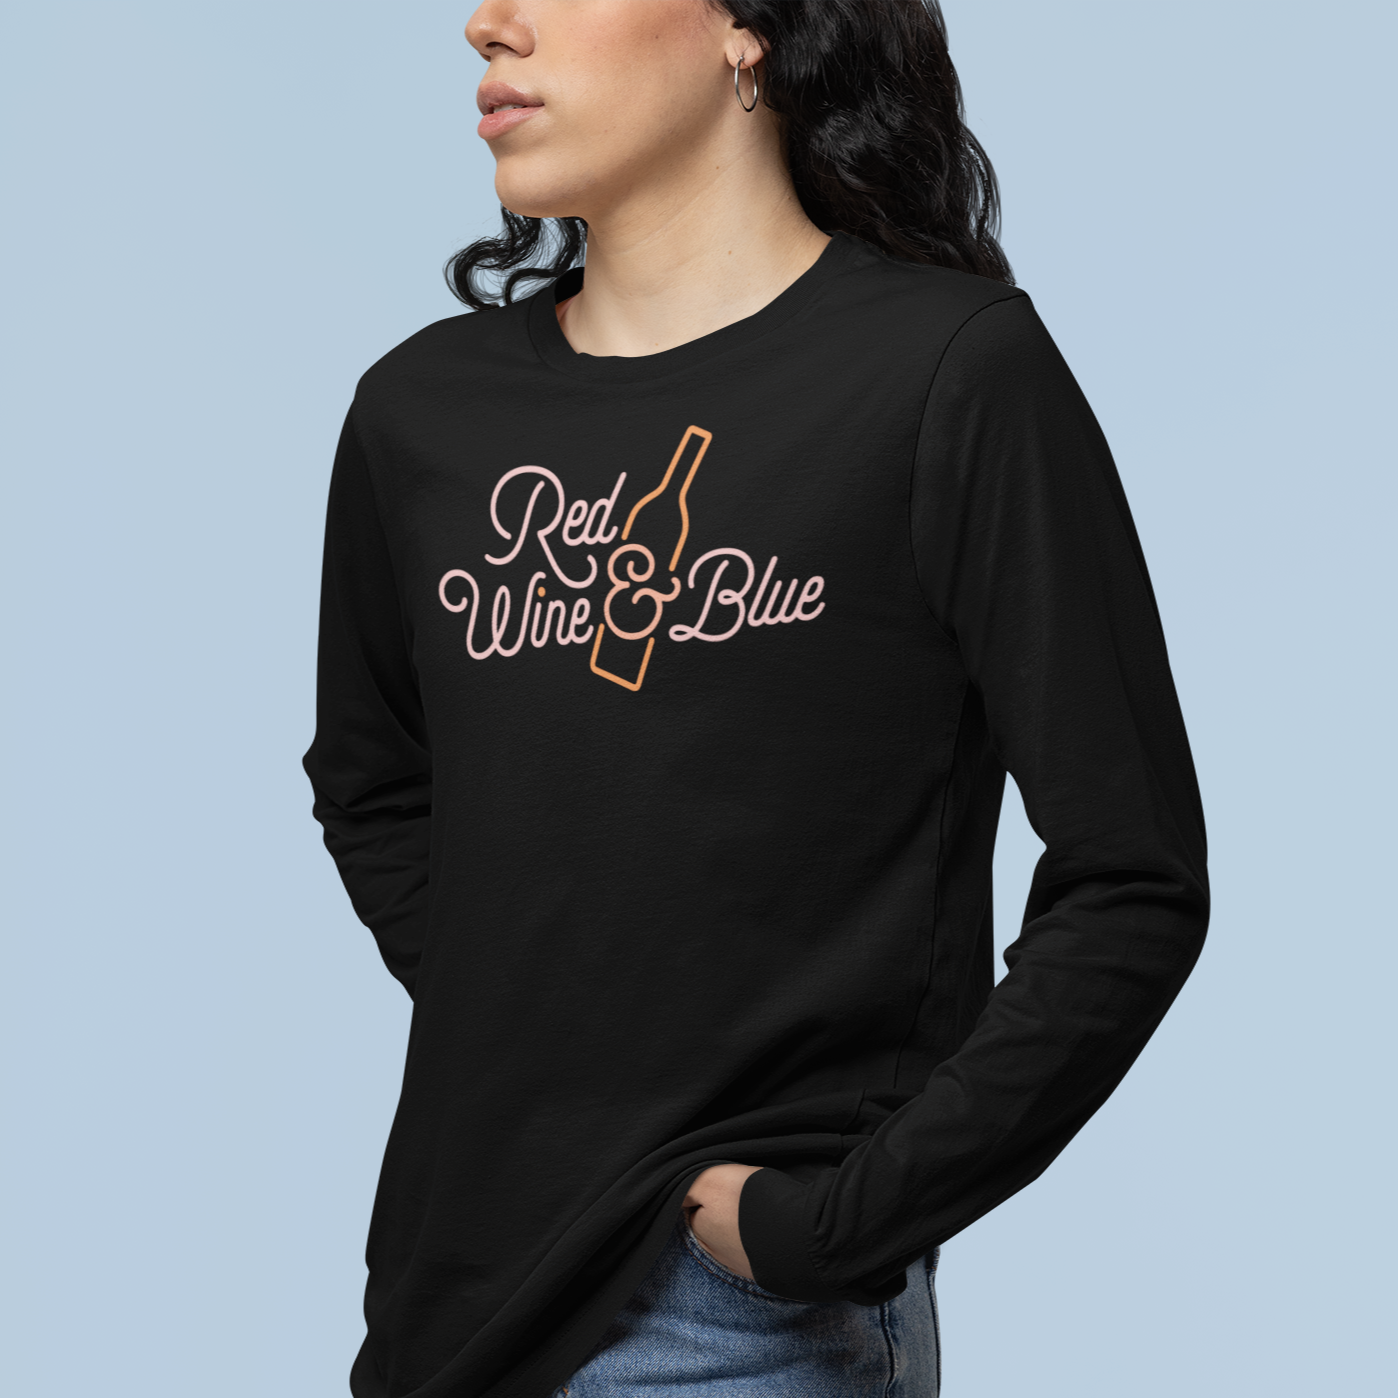 Red Wine and Blue Logo Long Sleeve T-Shirt